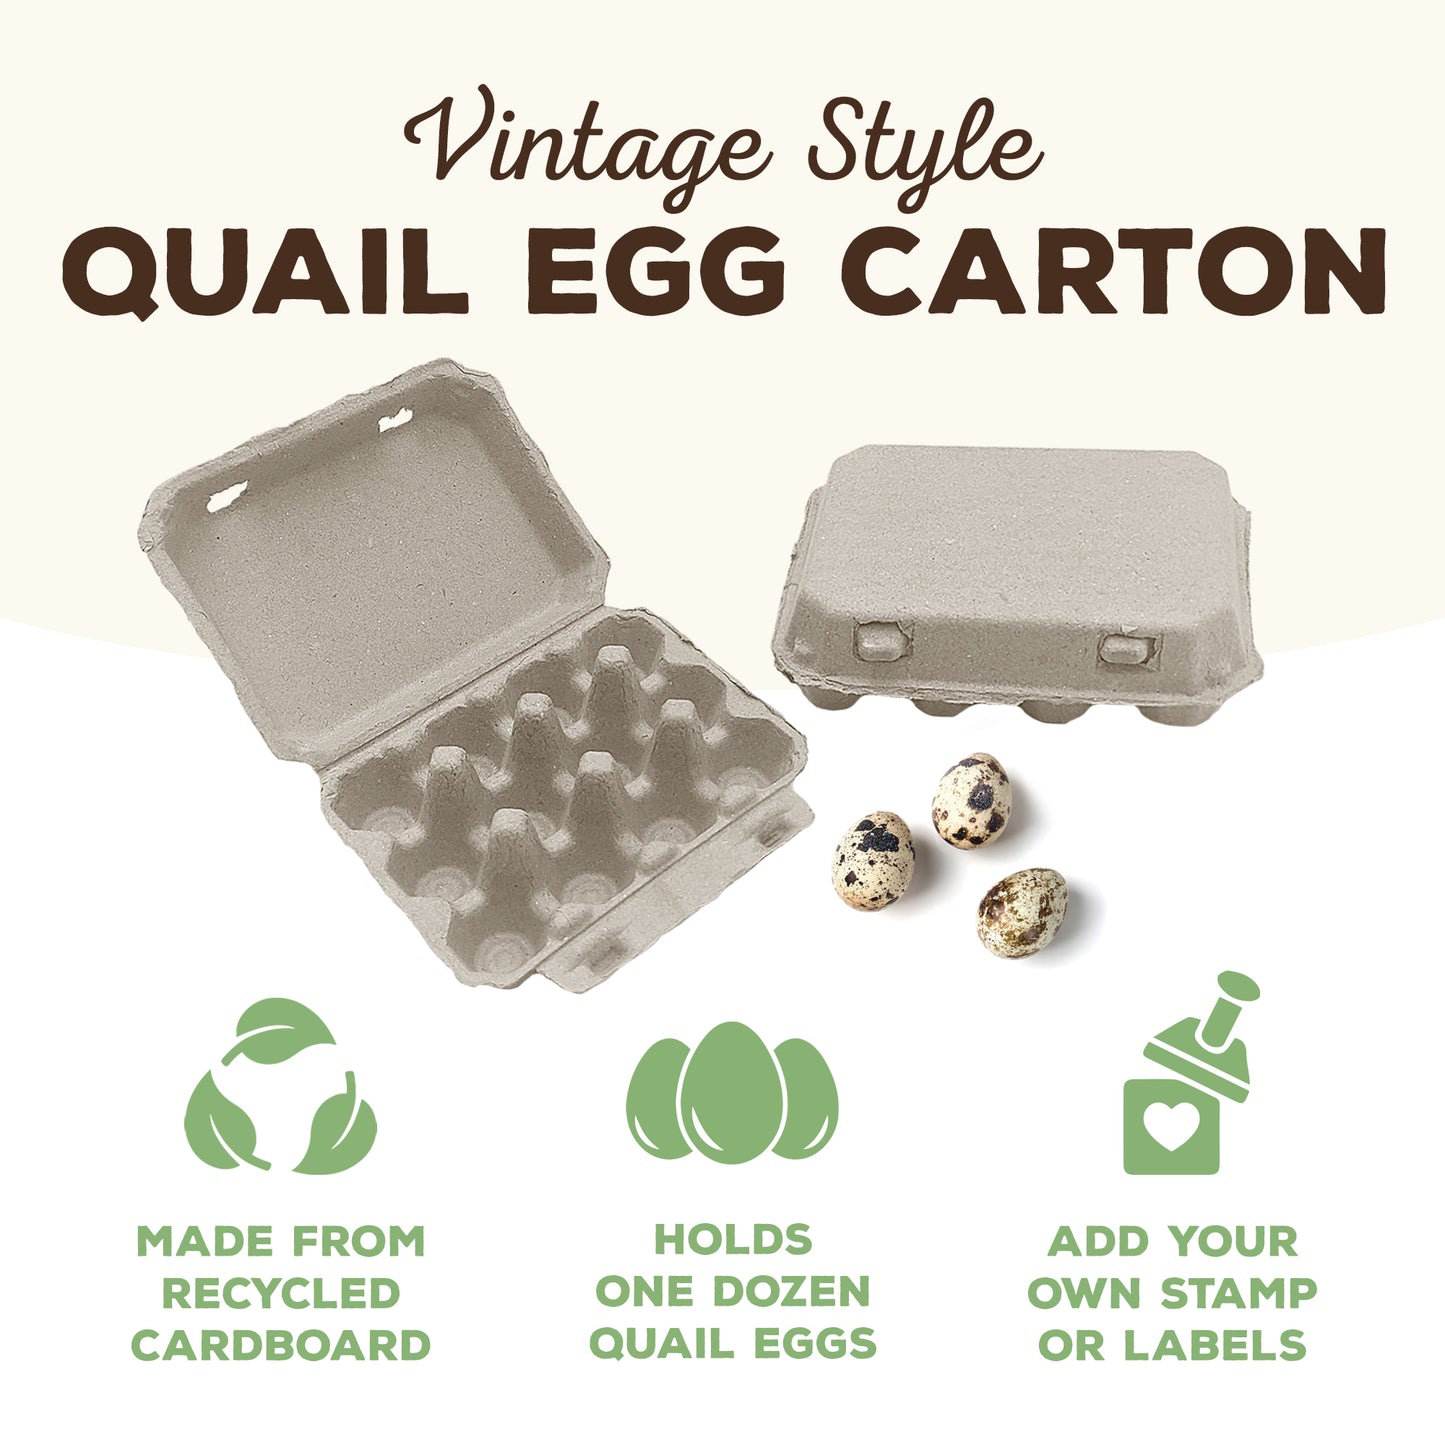 The vintage style quil egg cartons are made from recycled cardboard. 